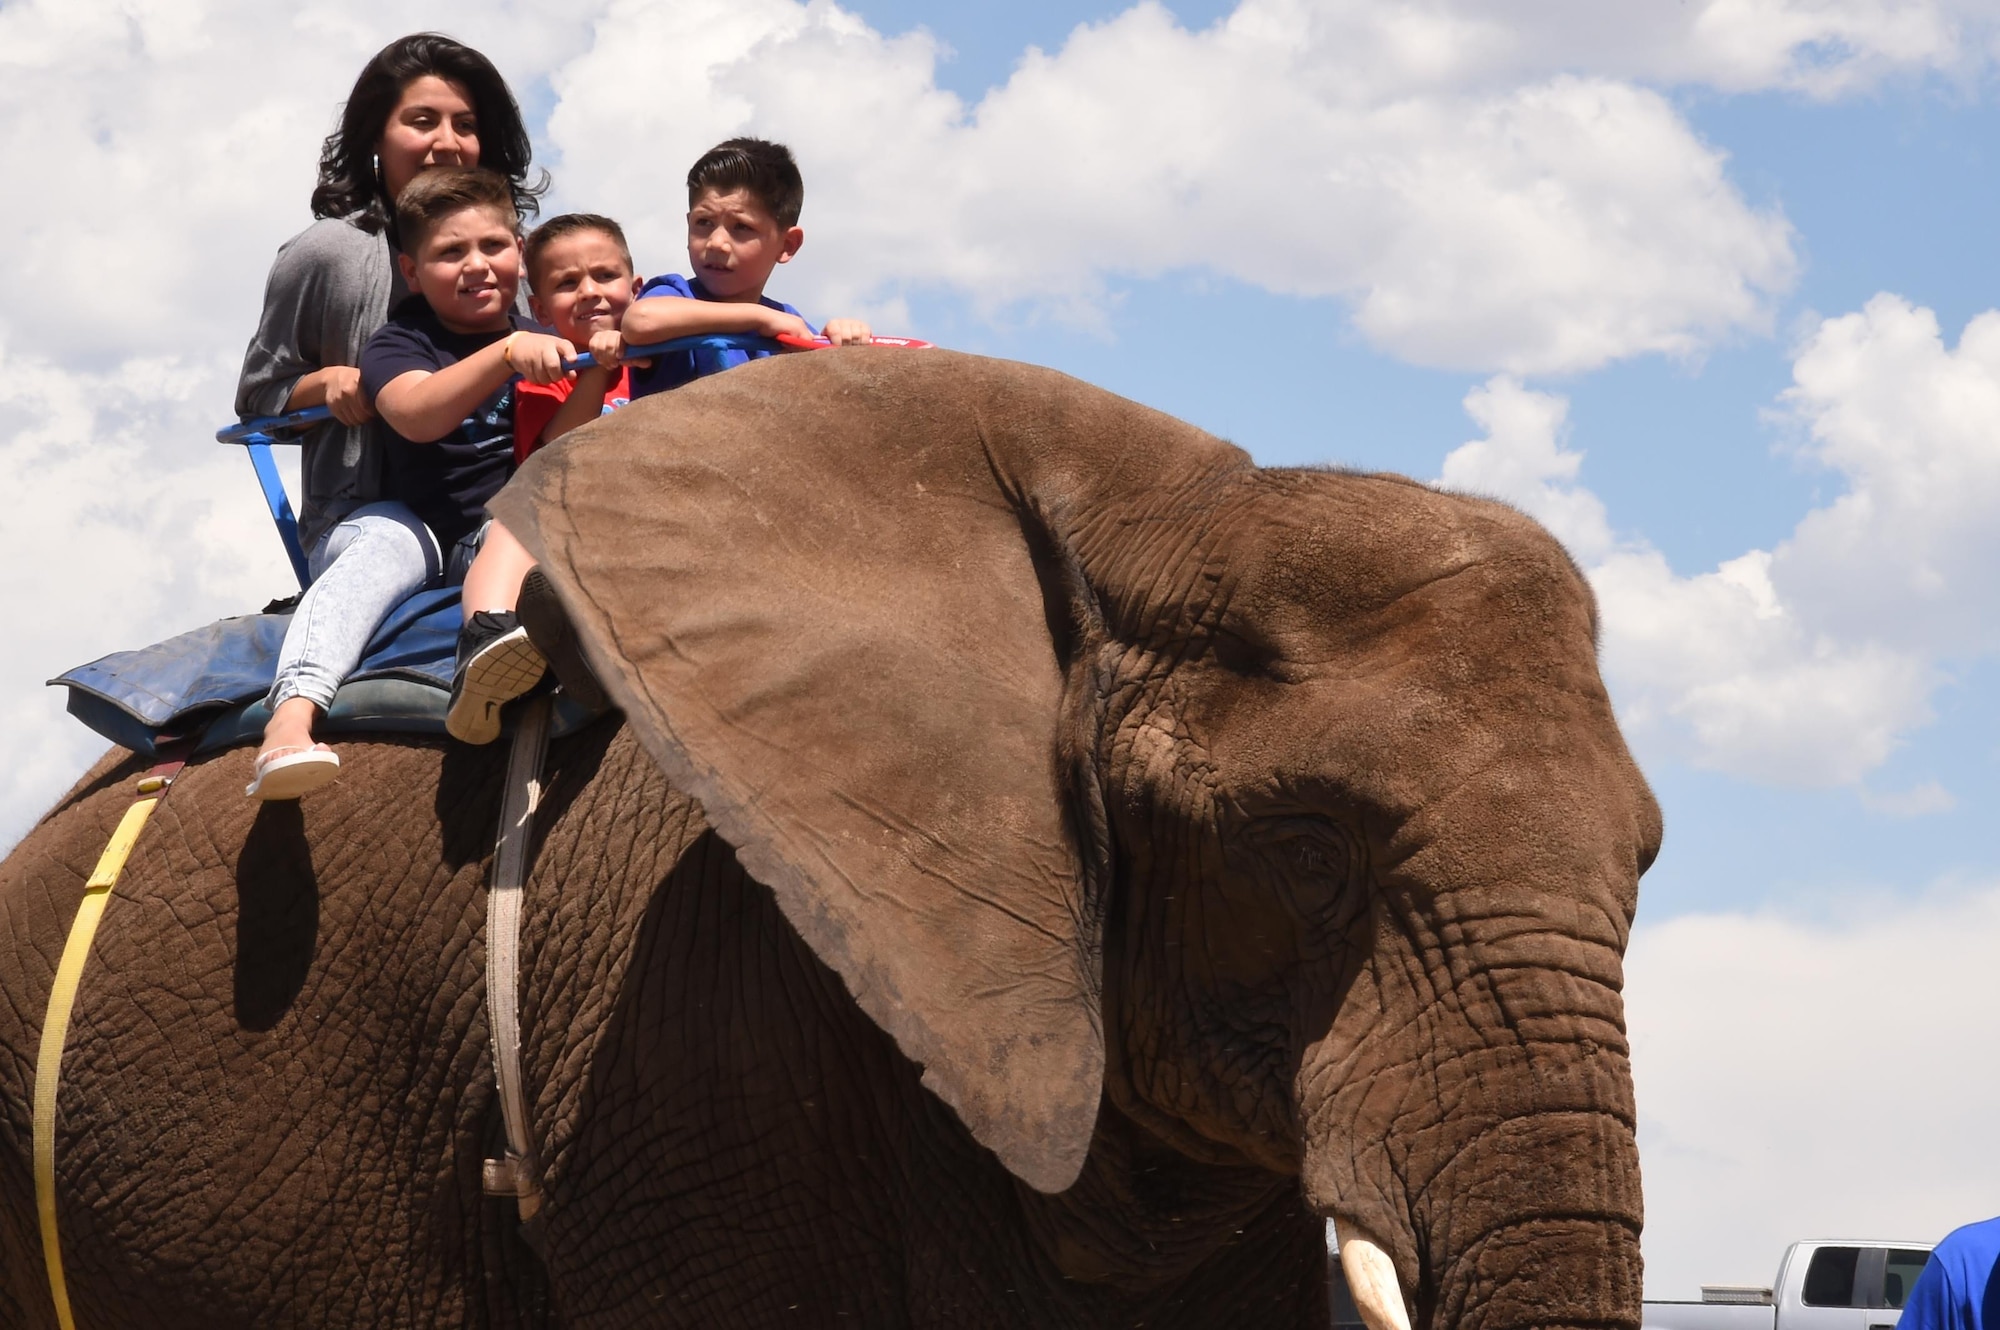 Jasmine Jaramillo, Elijah Lujan, Luciano Lujan and Elonzo Lujan ride an elephant during the Summer Slam Base Picnic at Schriever Air Force Base, Colorado, Friday, July 15, 2016. Several elephants and camels were brought to the picnic to give families rides. (U.S. Air Force photo/2nd Lt. Darren Domingo)